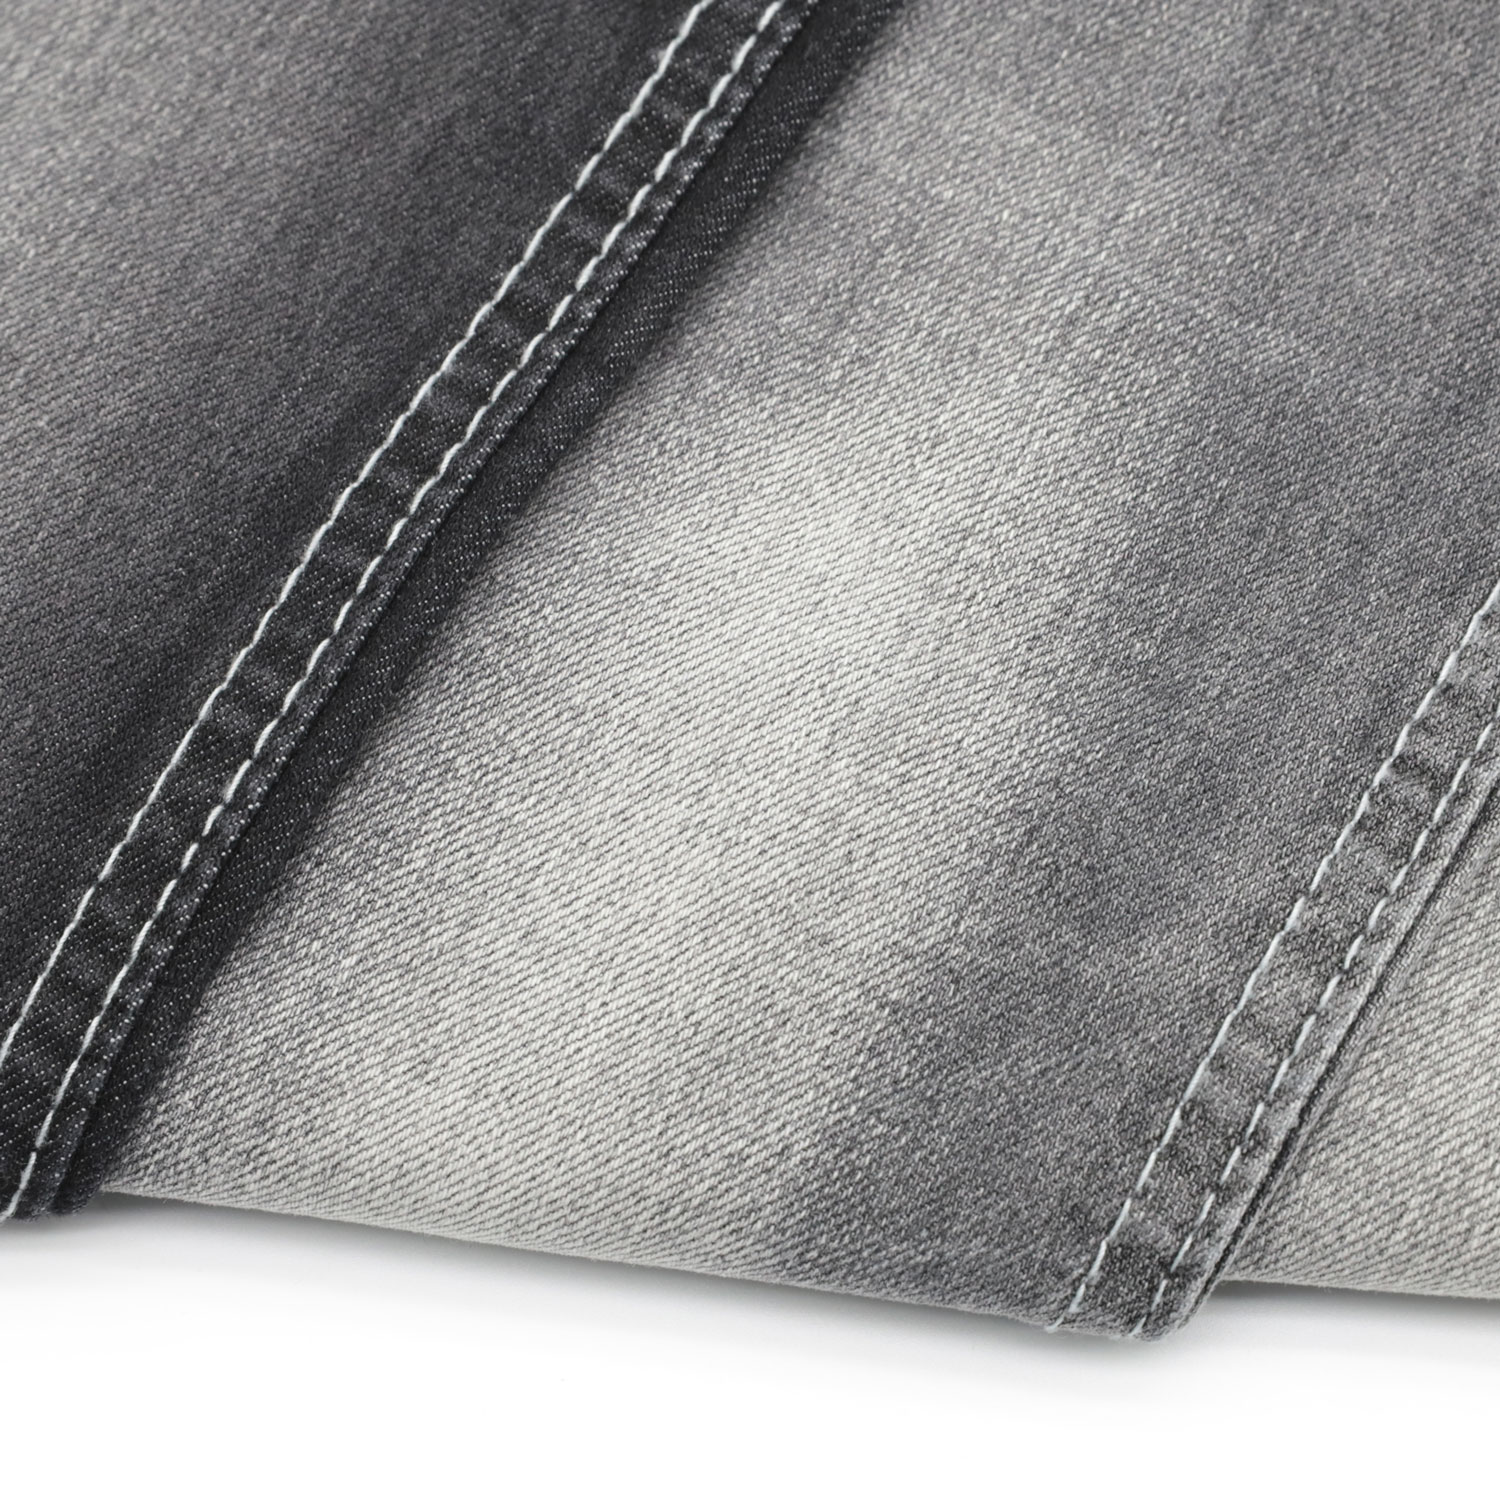 Reasons to Add 4 Way Stretch Denim Fabric to Your Work Today 2